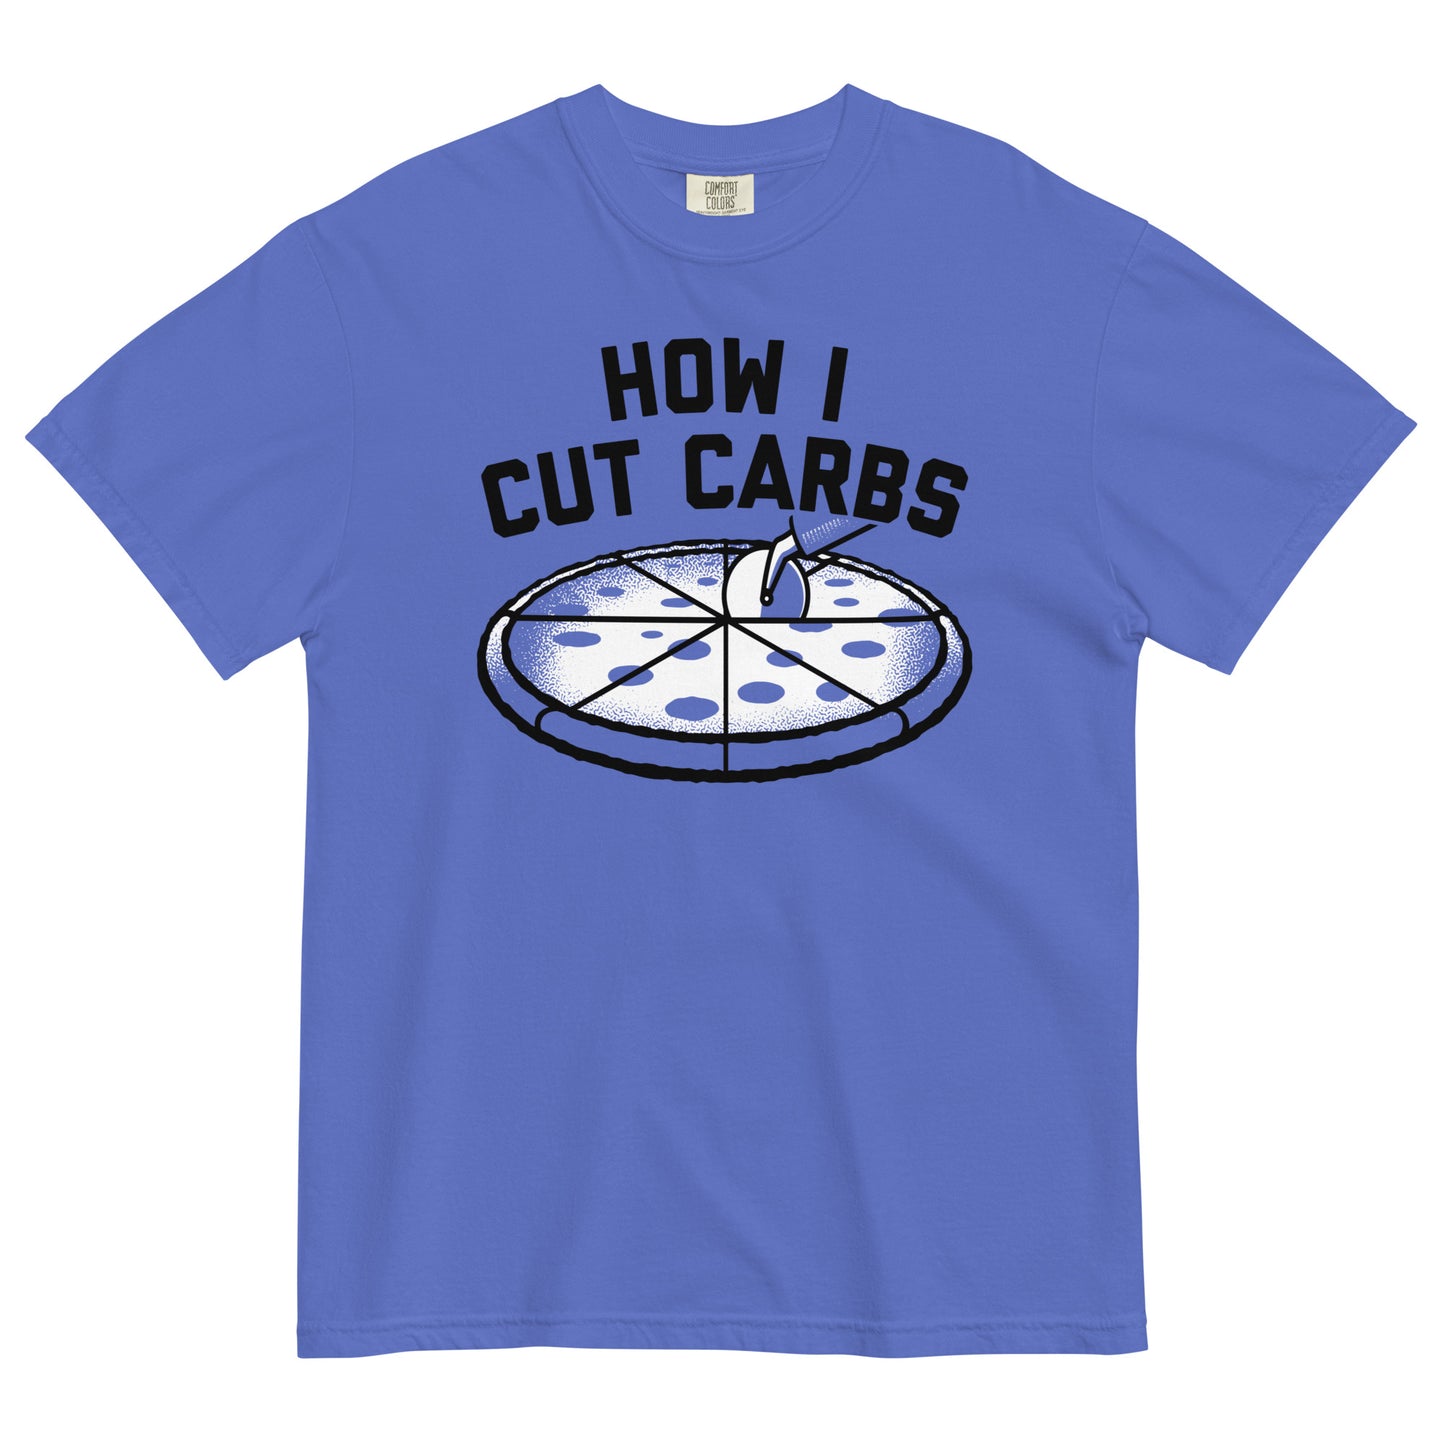 How I Cut Carbs Men's Relaxed Fit Tee